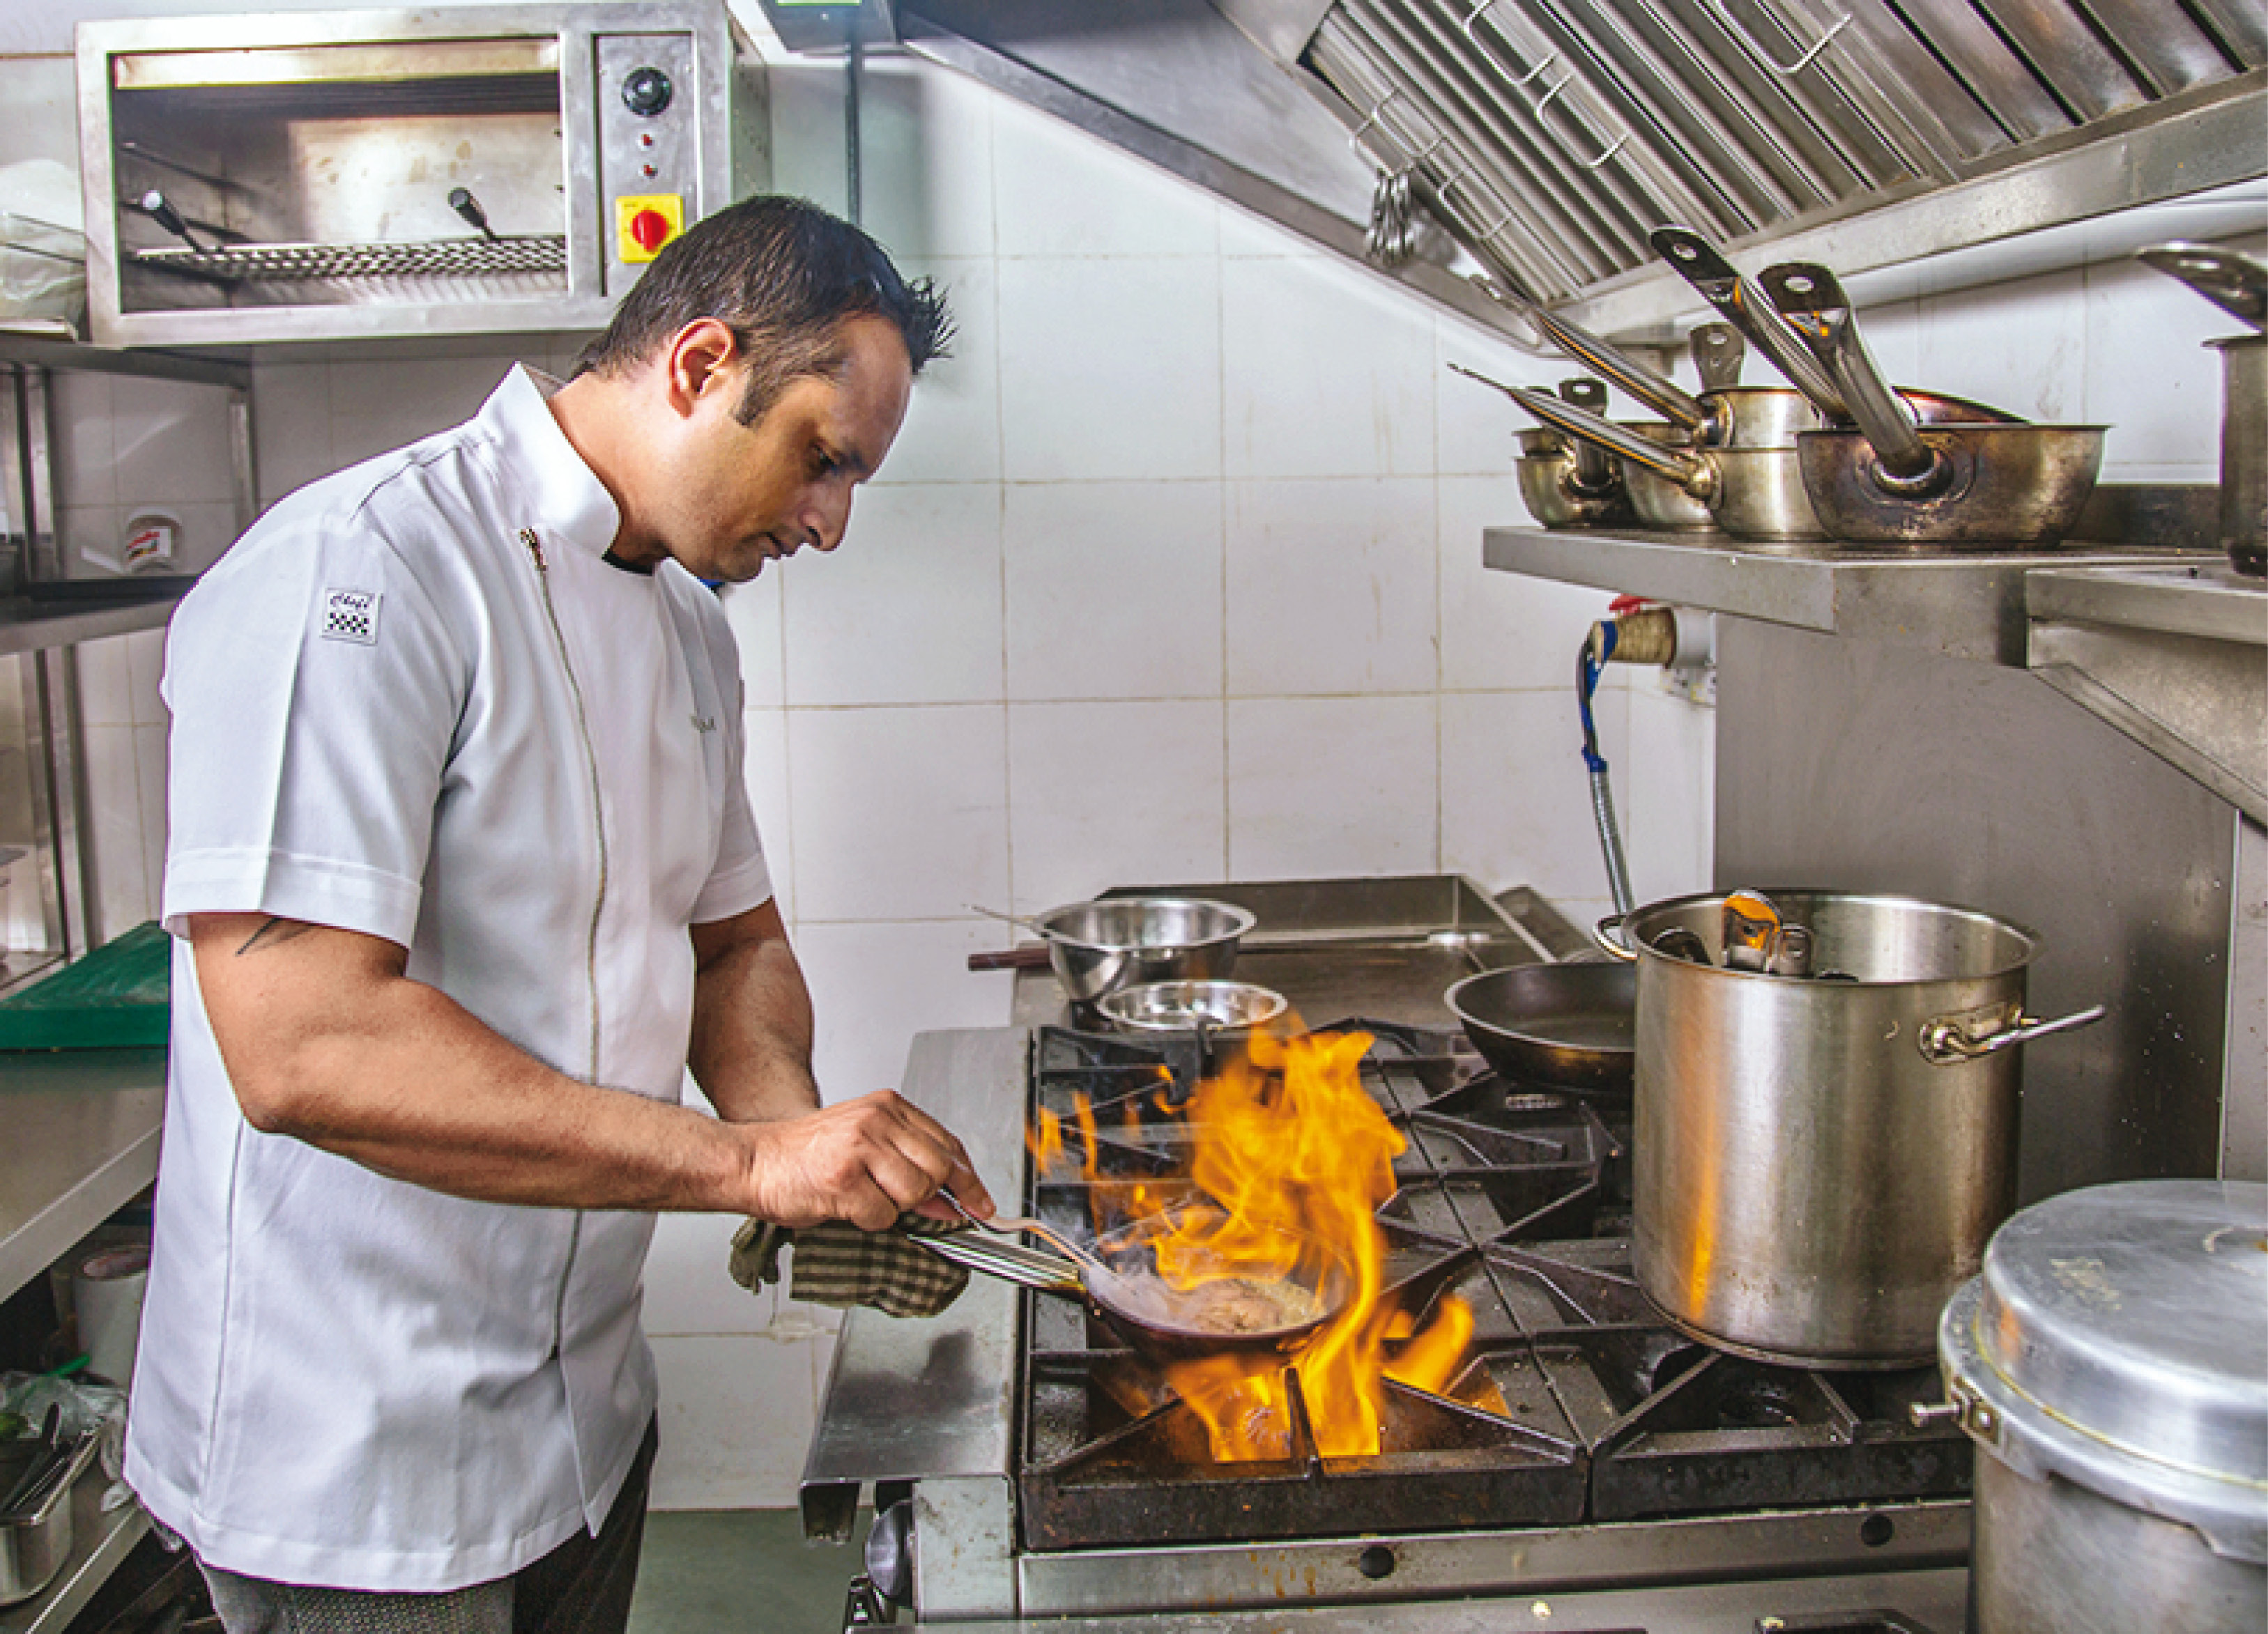 Chef Vikramjeet Roy spent months researching pizza ingredients